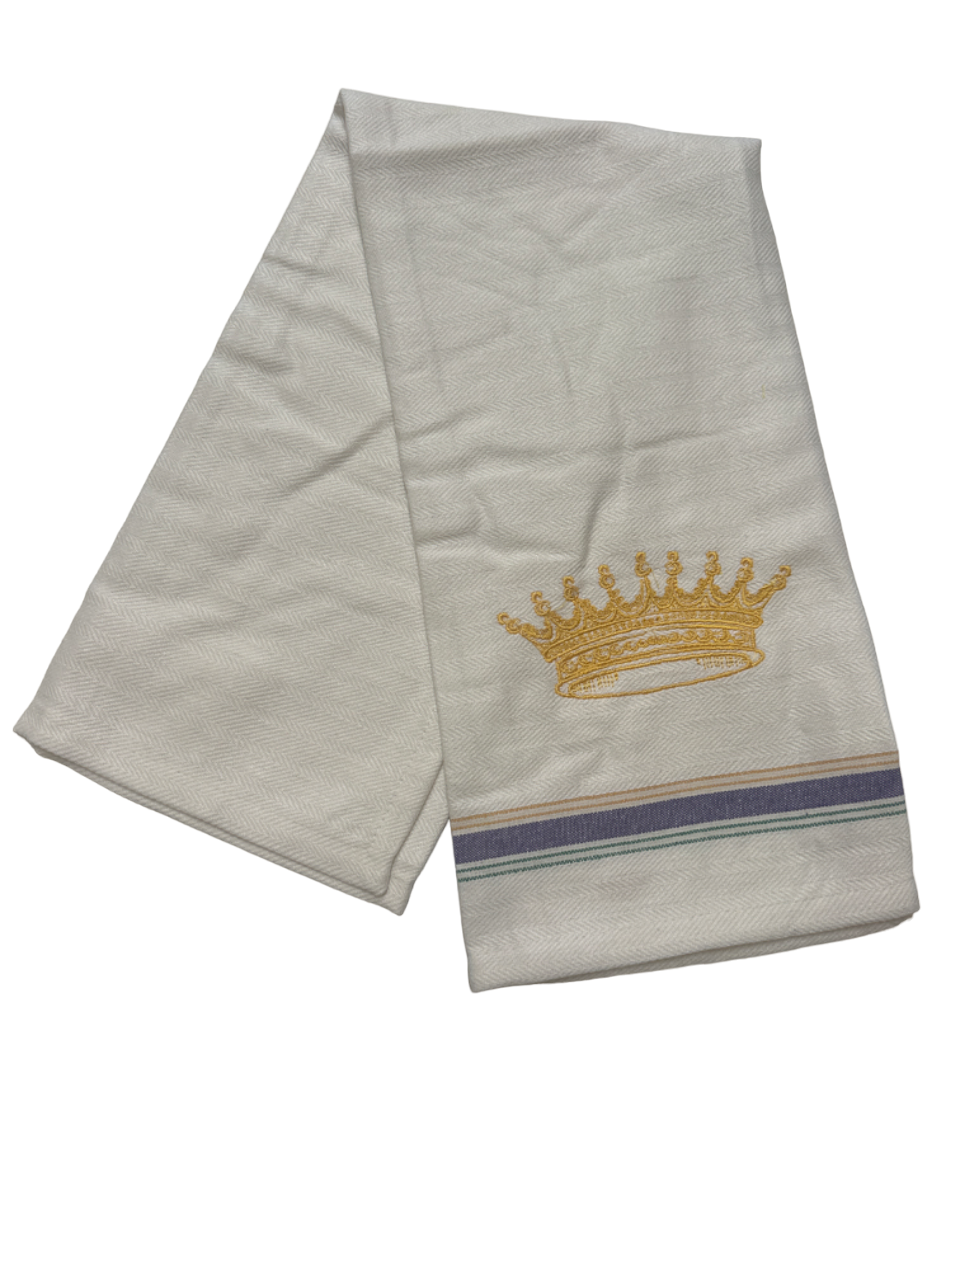 King of Carnival Hand Towel